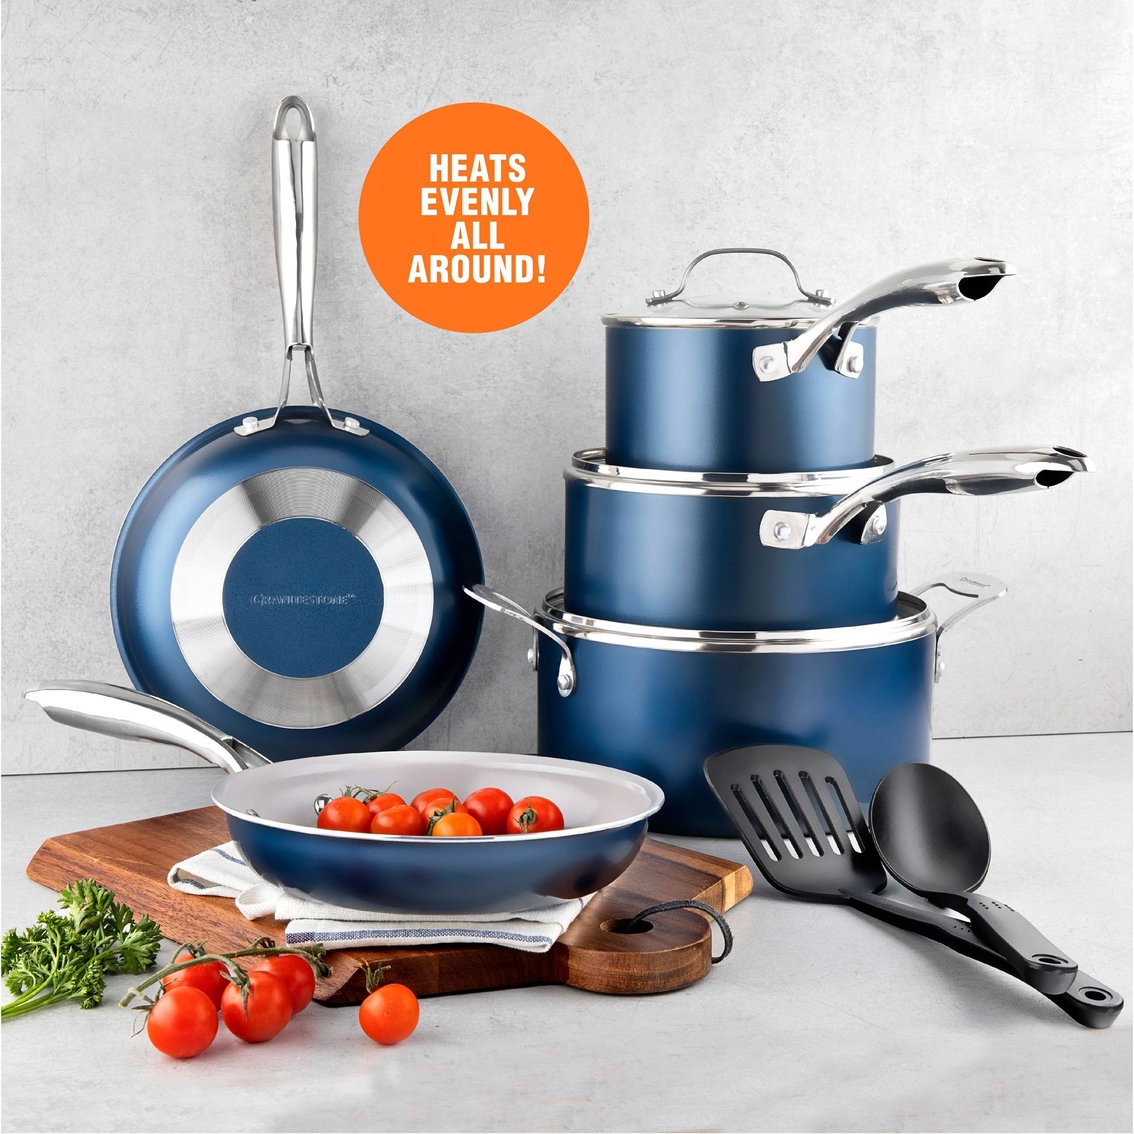 Granite Stone Nonstick Navy Cookware 10 pc. Set with Utensils - Image 2 of 2